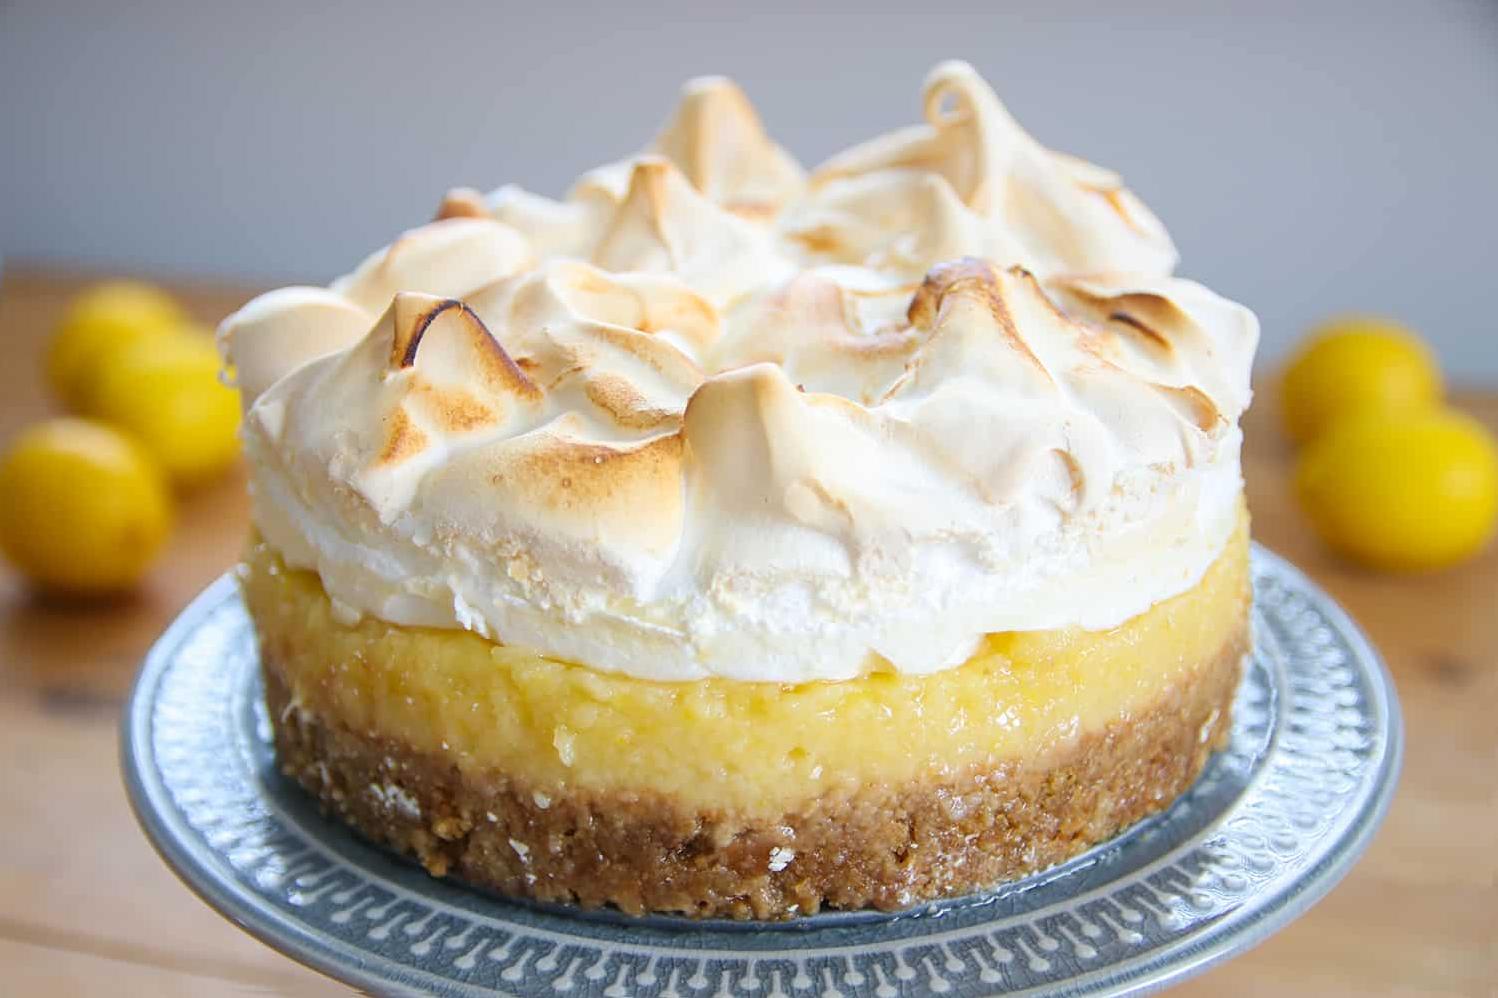  Tangy citrus meringue that's gluten-free and delicious!